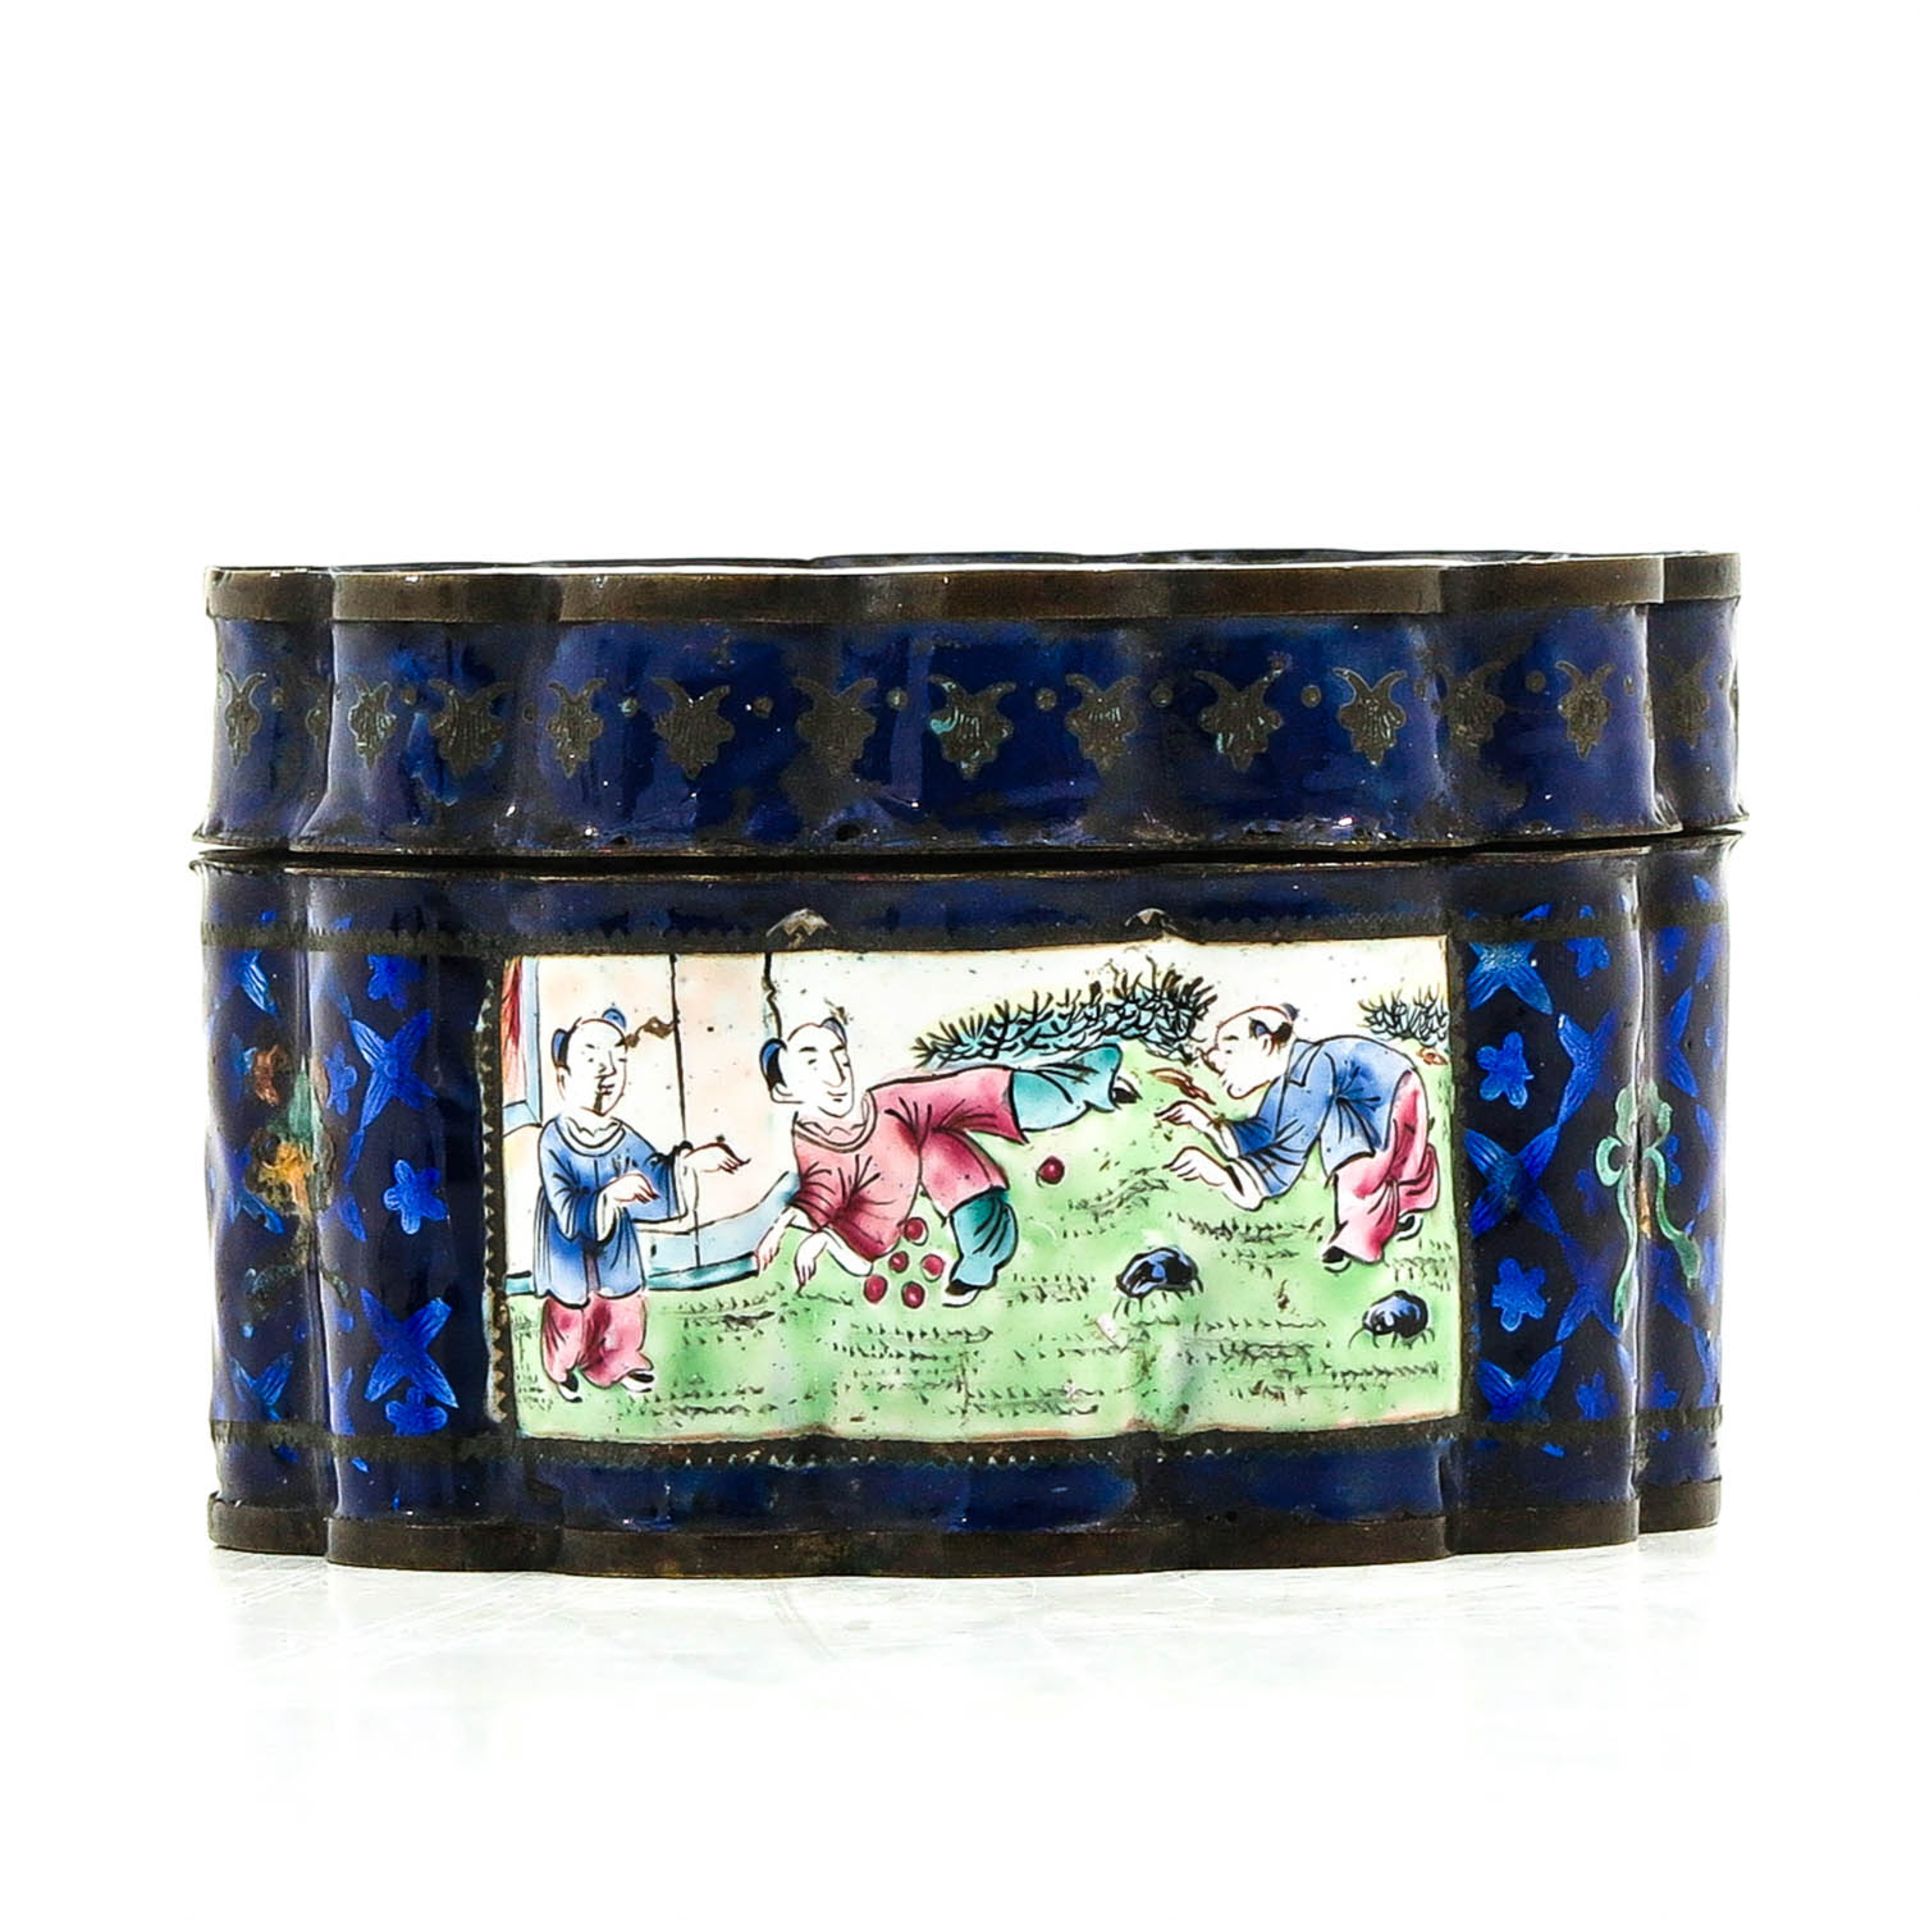 A Round Cloisonne Box - Image 3 of 10